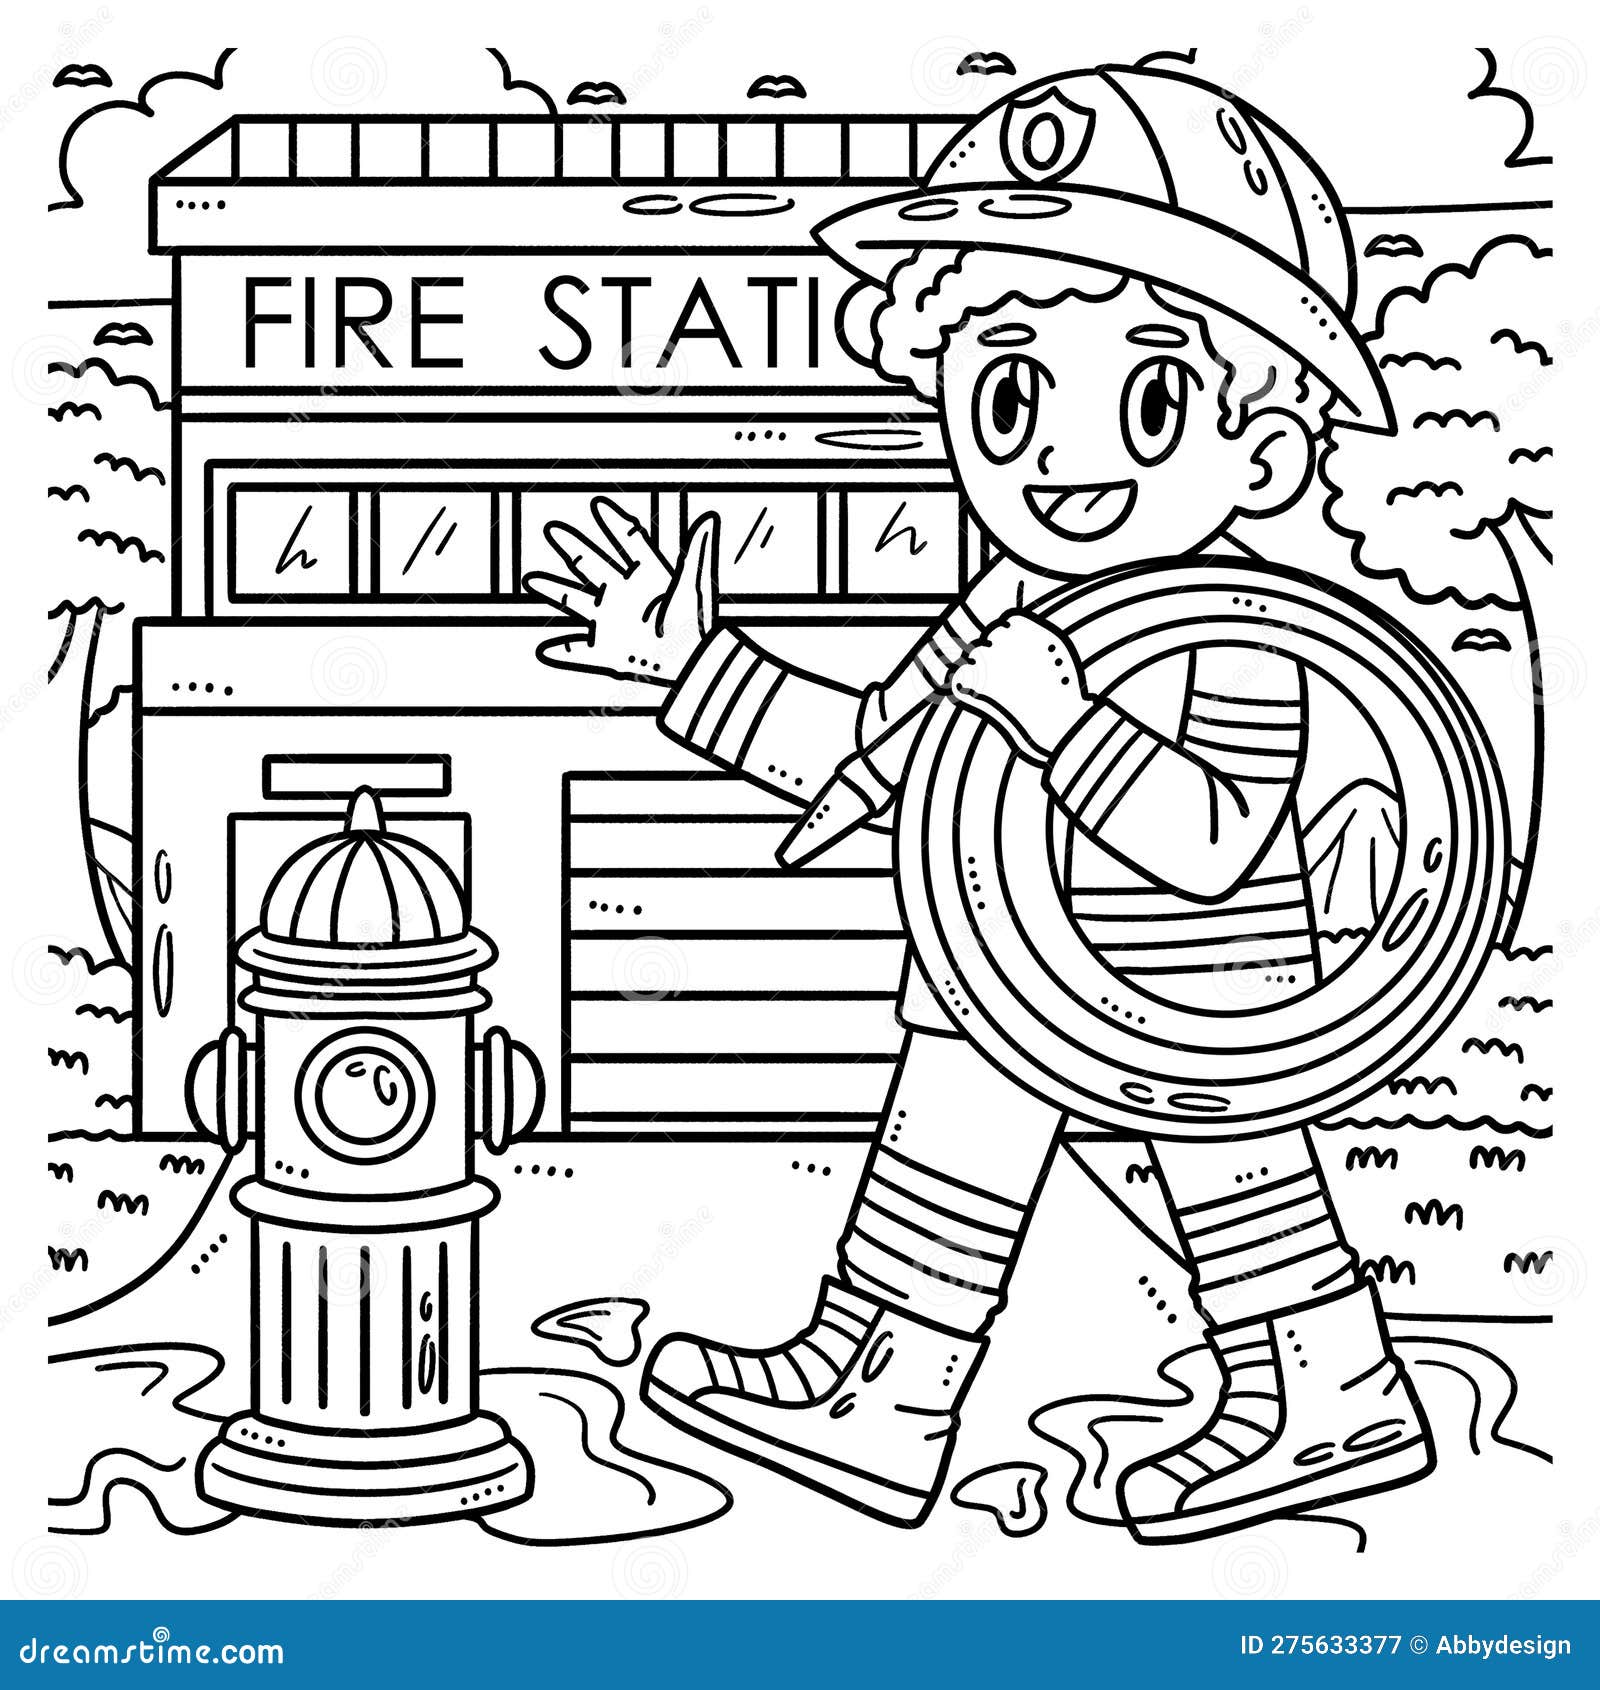 Labor Day Fireman with Hose Coloring Page for Kids Stock Vector ...